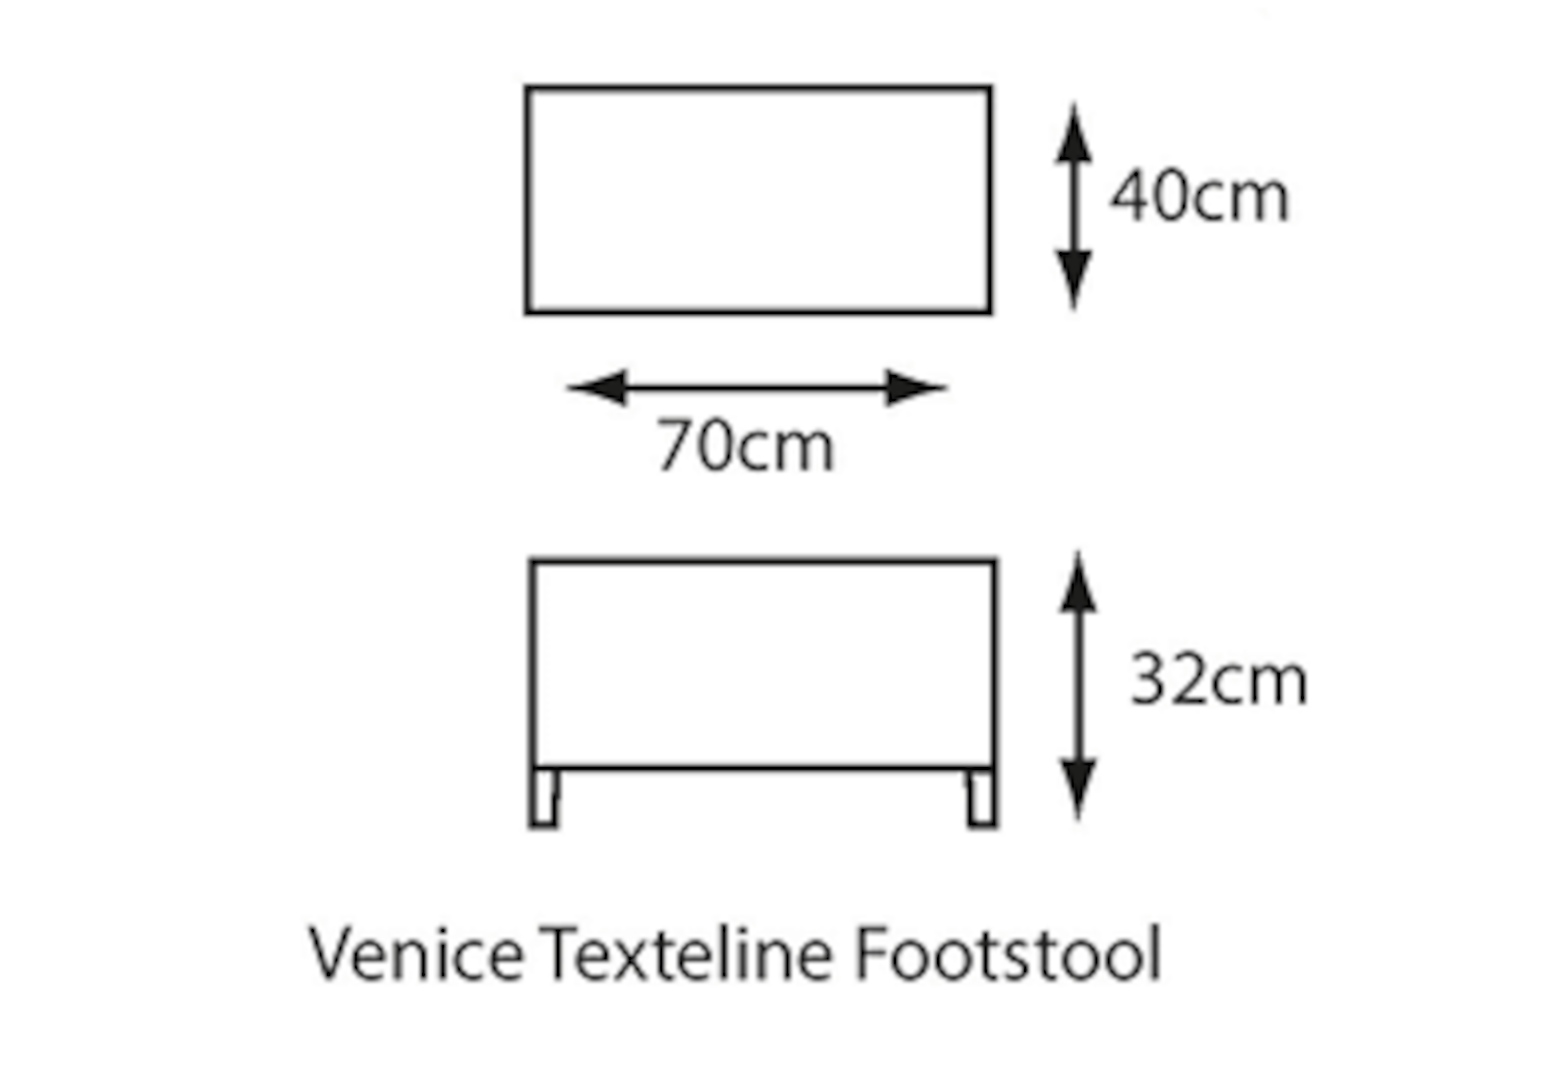 Stool with Cushion - dimensions image